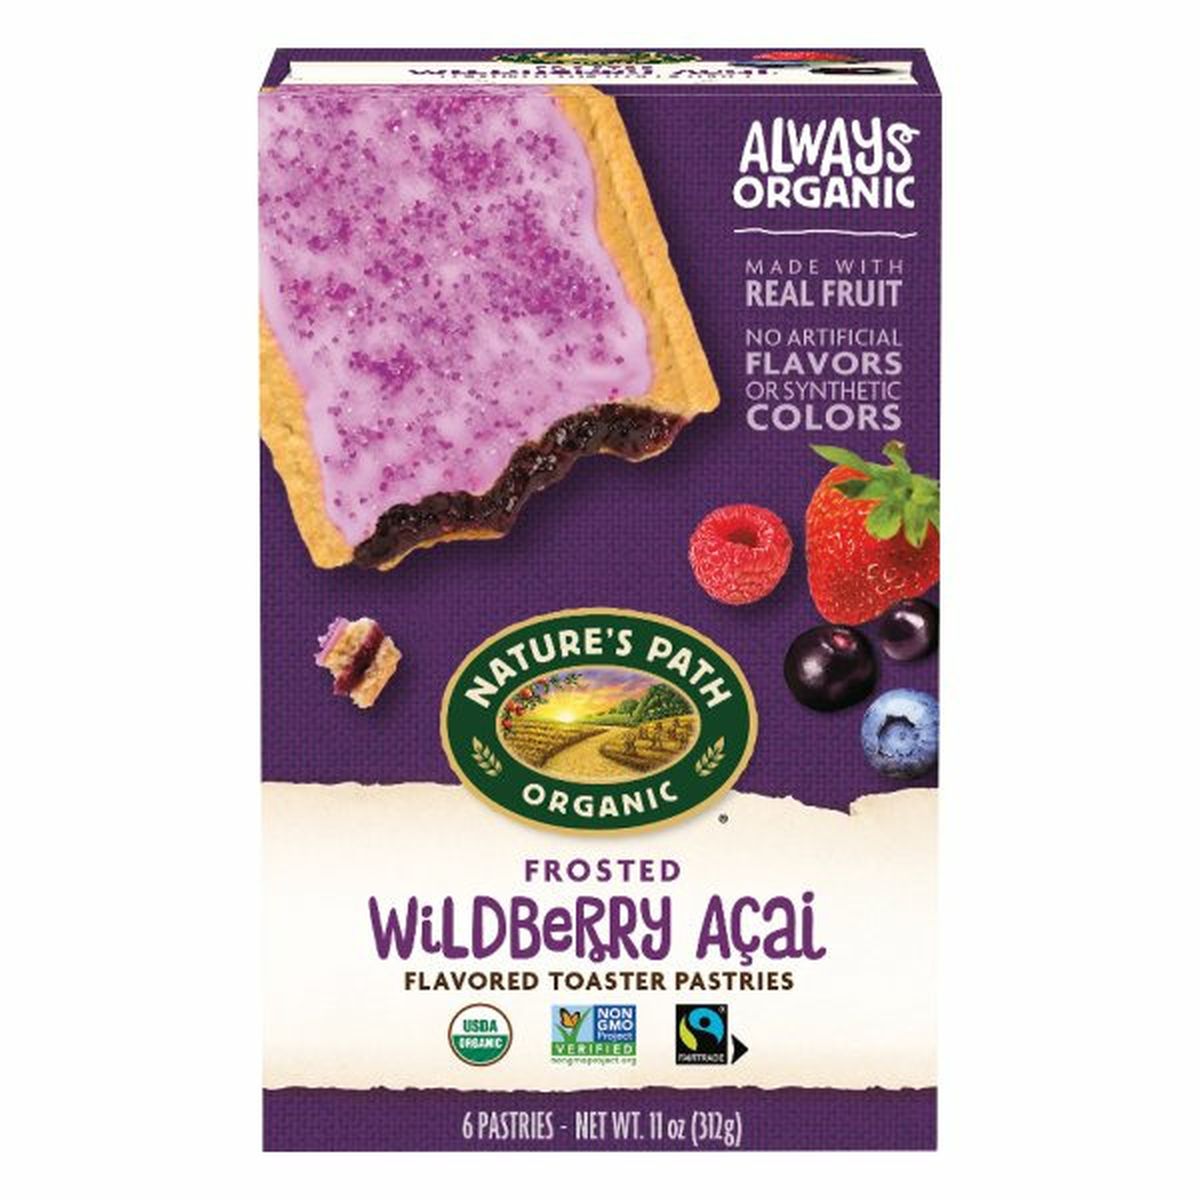 Calories in Nature's Path Toaster Pastries, Wildberry Acai Flavored, Frosted